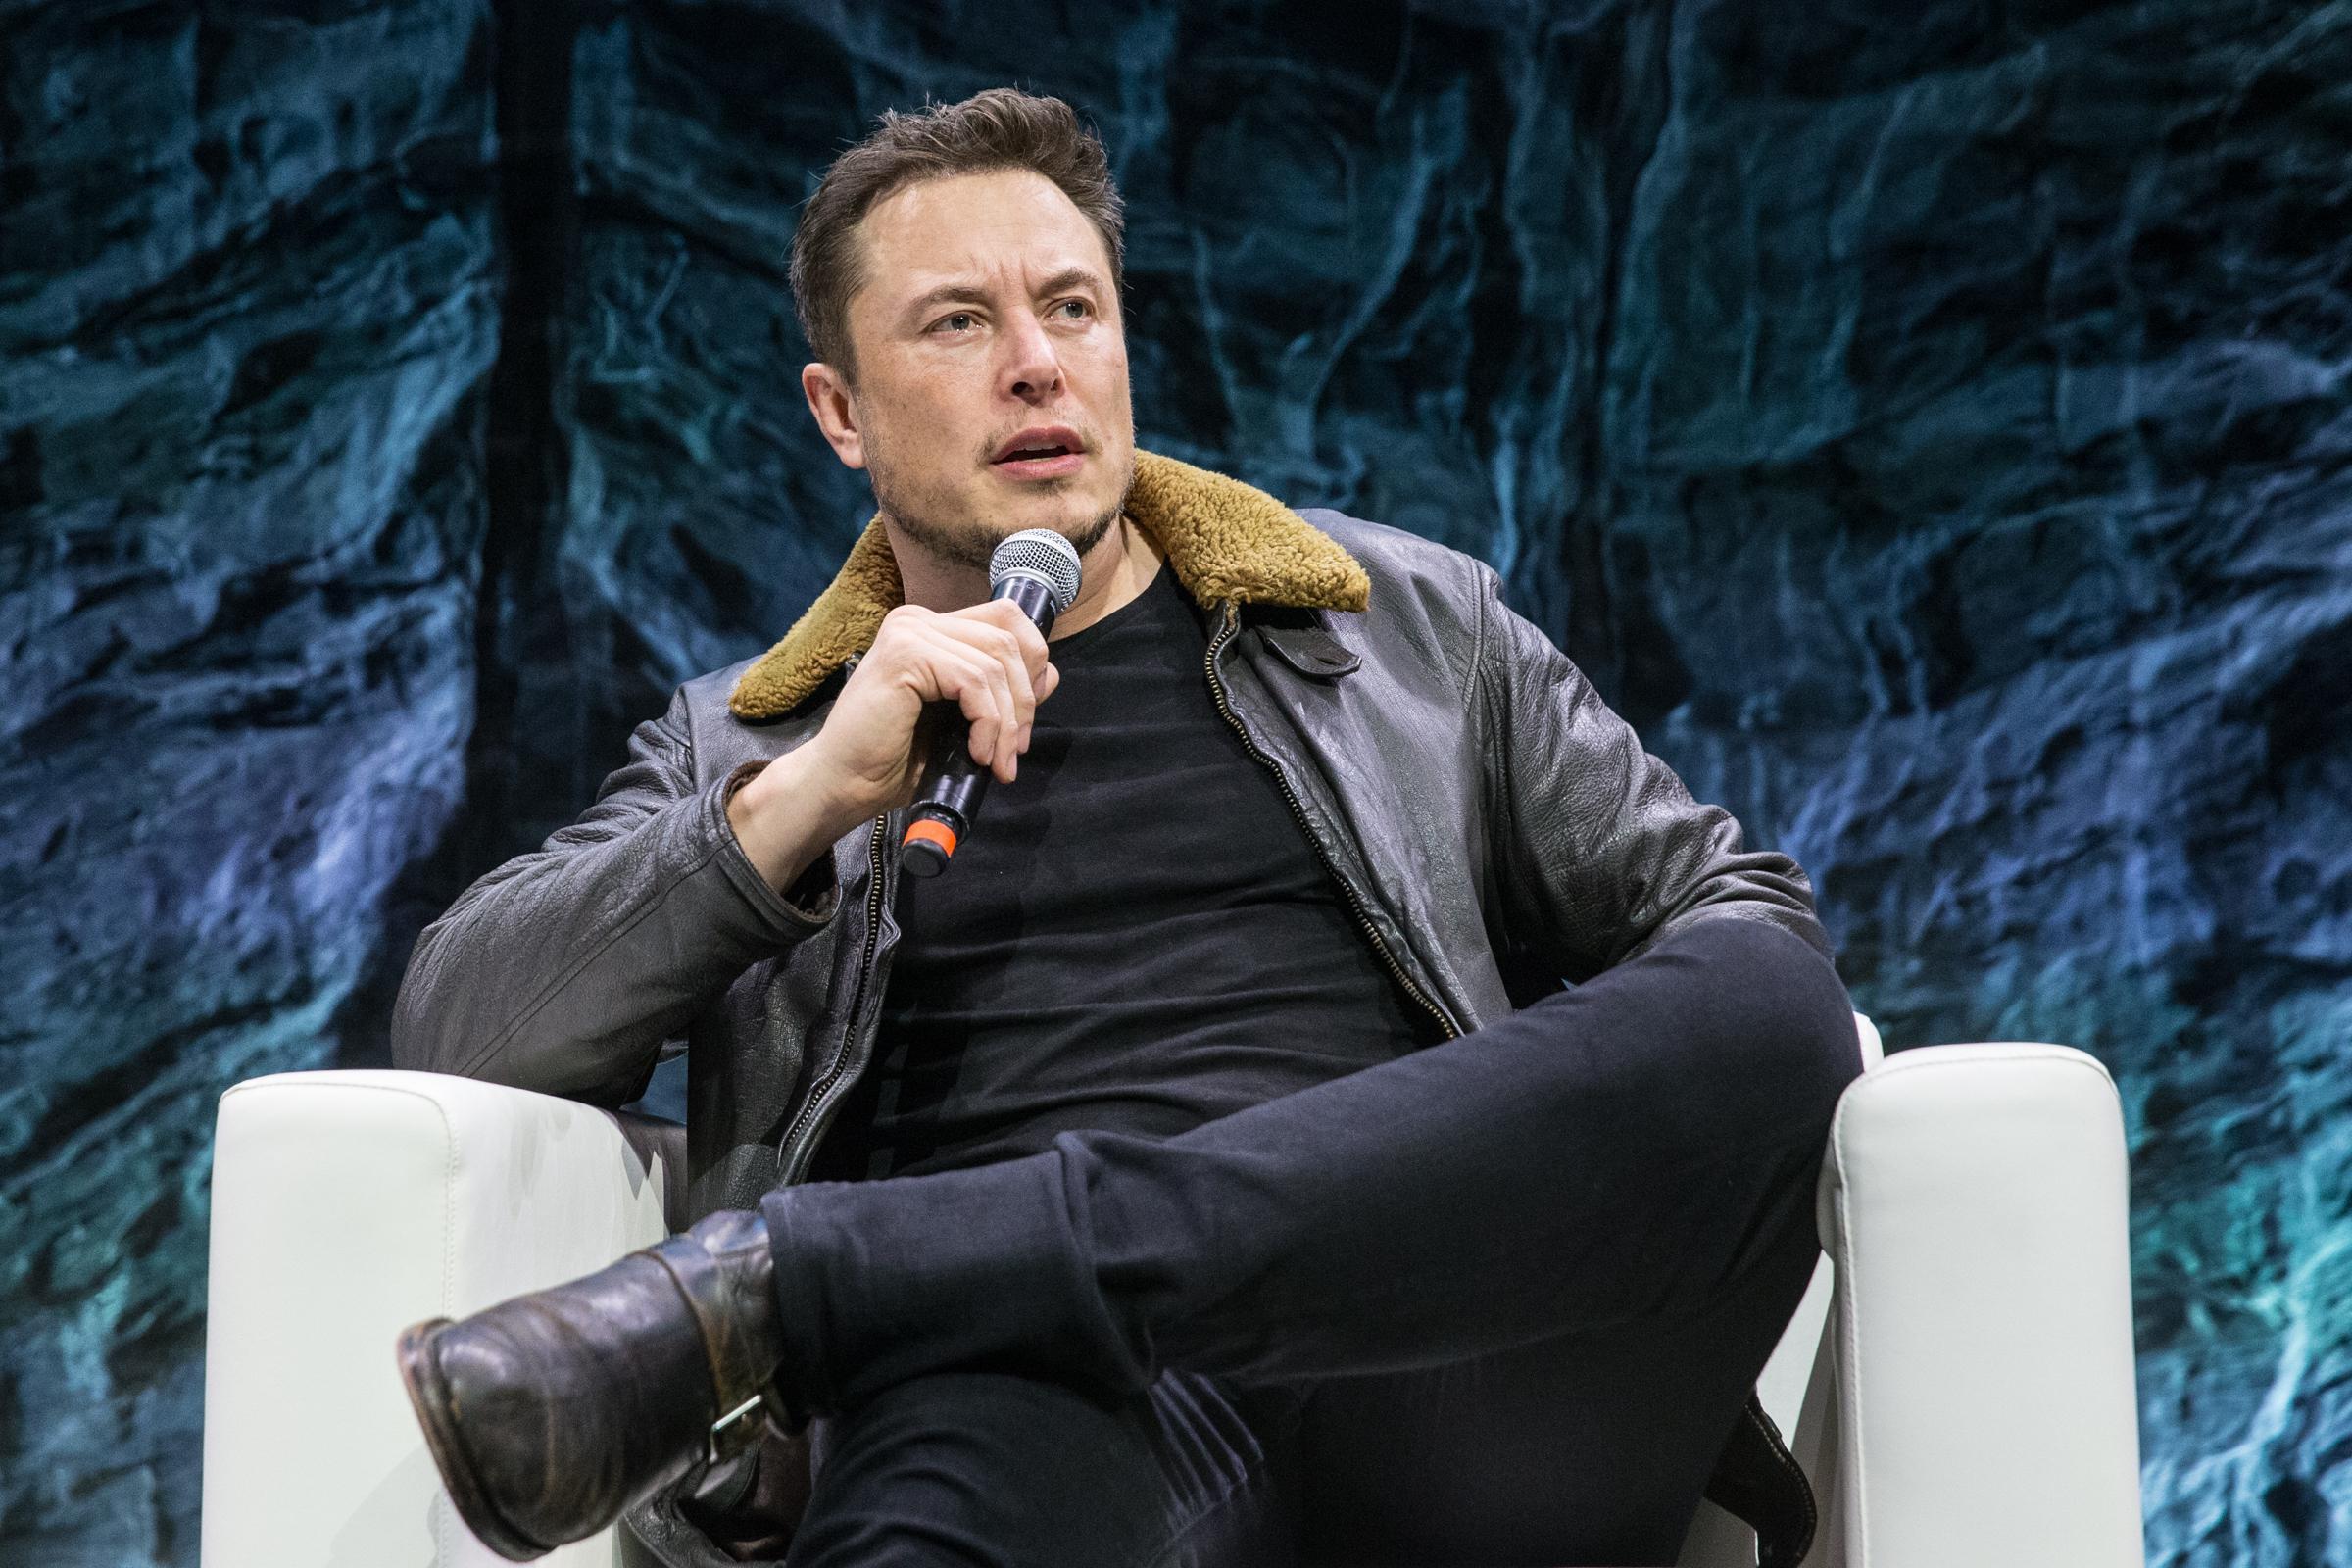 Elon Musk, CEO of SpaceX and Tesla, speaks during a South by Southwest 2018 session in Austin. (Photo by Suzanne Cordeiro/For the Austin American-Statesman/TNS/Sipa USA)